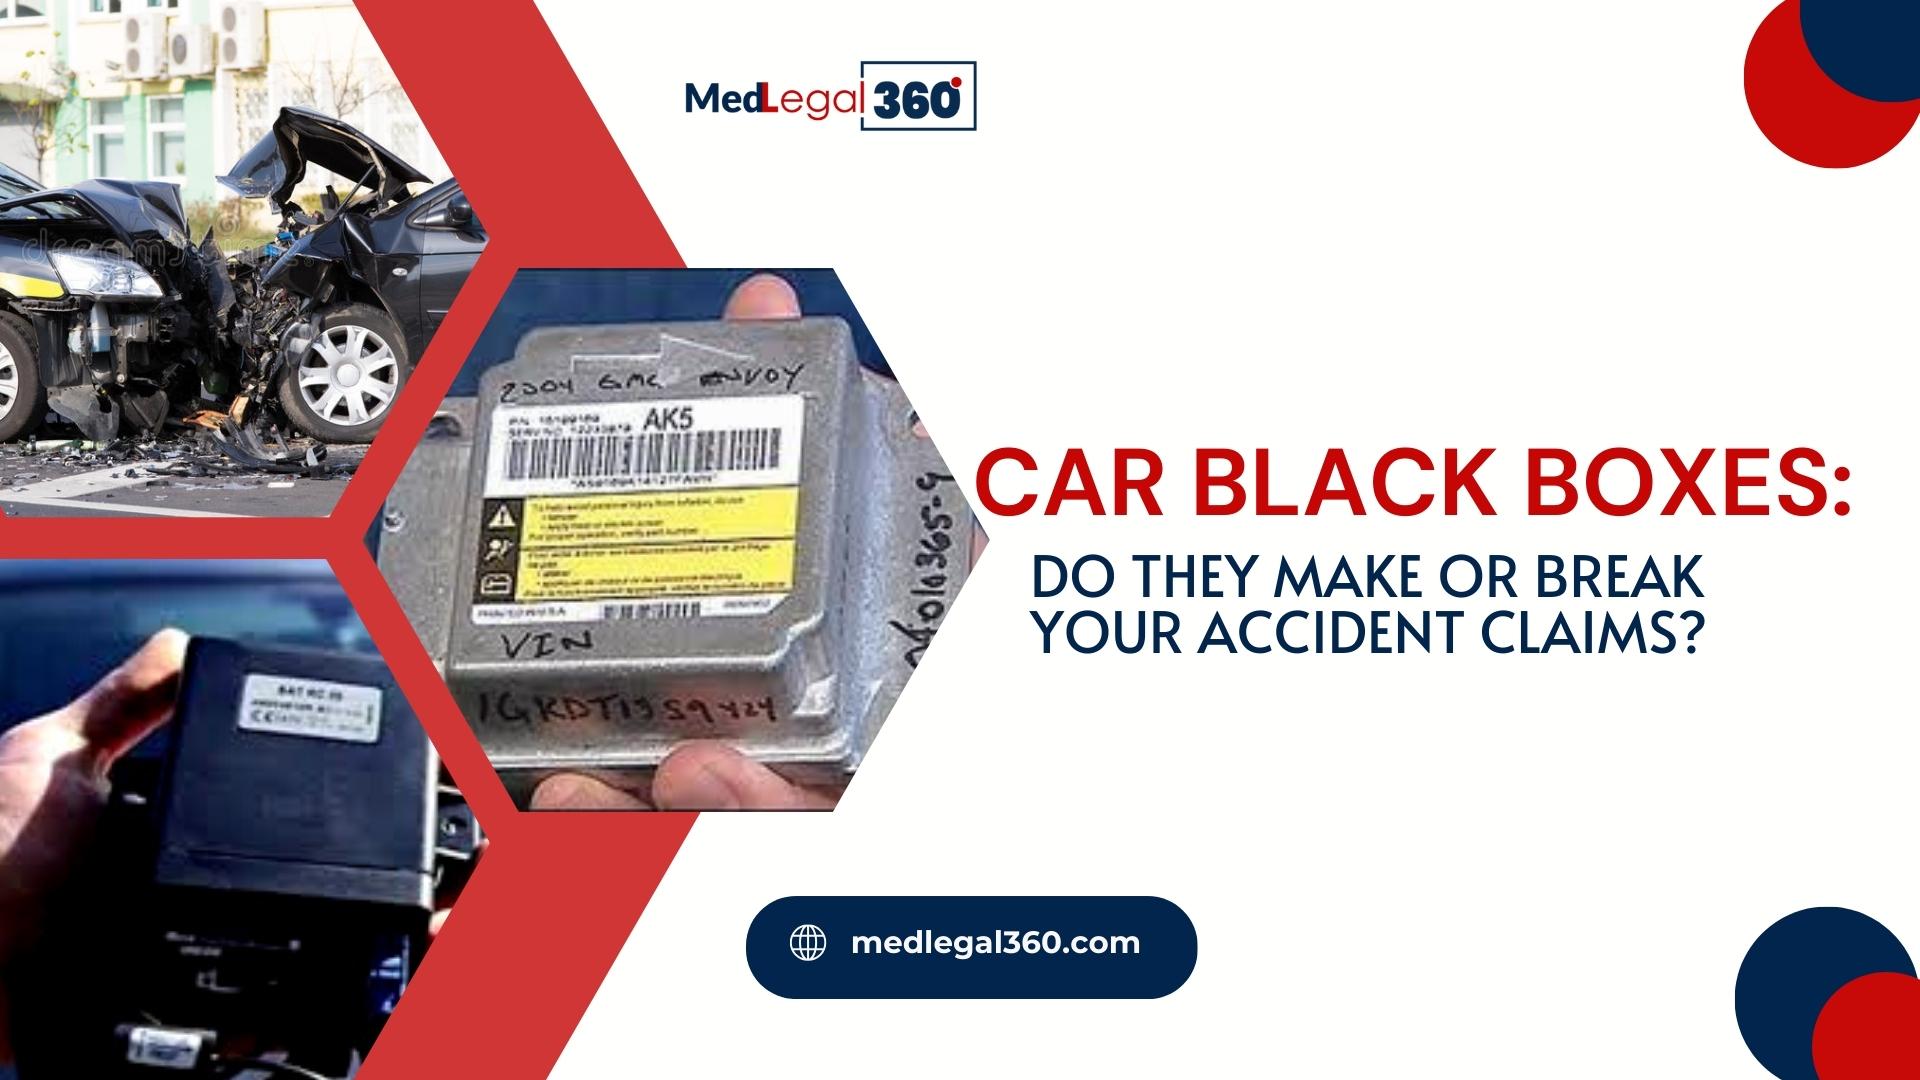 Car Black Boxes: Do They Make or Break Your Accident Claims?